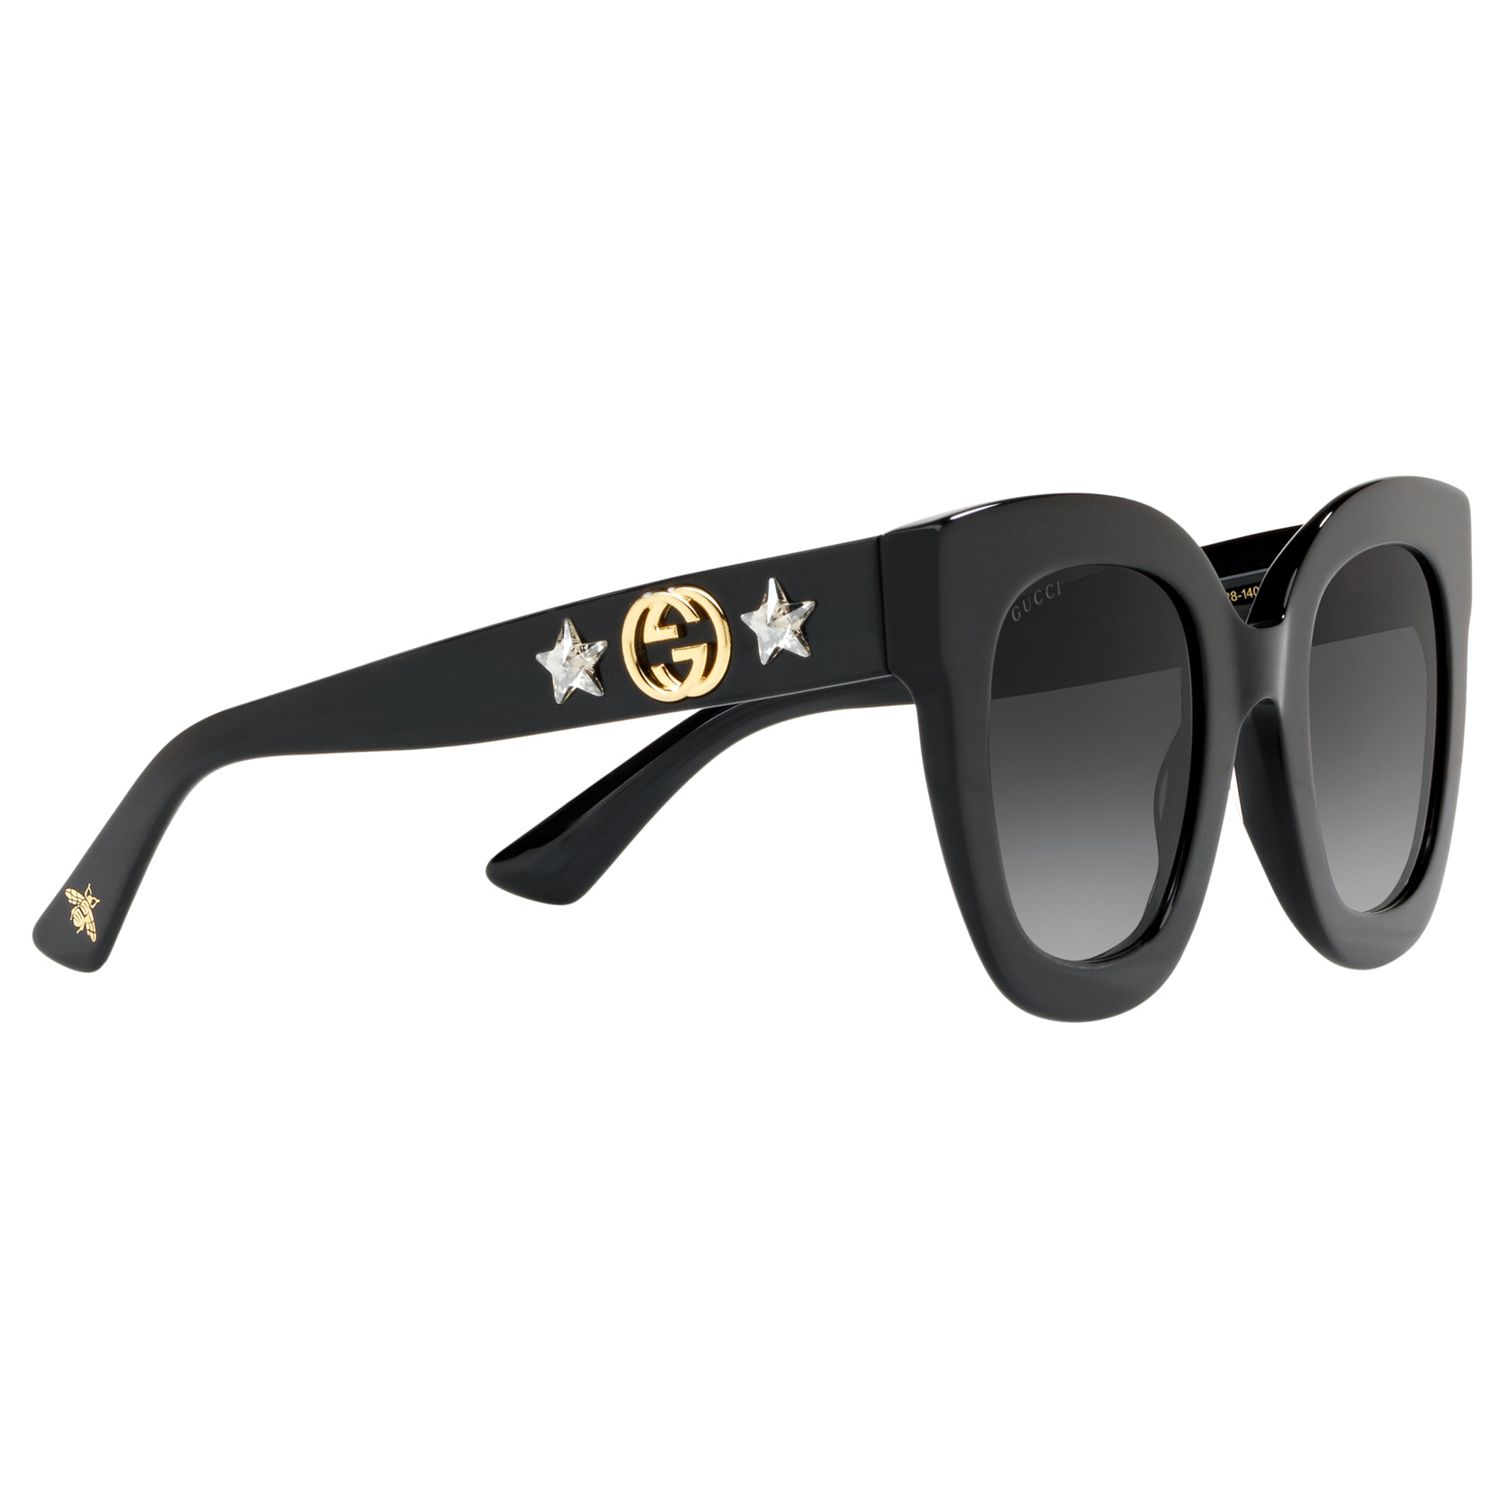 Buy Gucci GG0208S Statement Oval Sunglasses Online at johnlewis.com